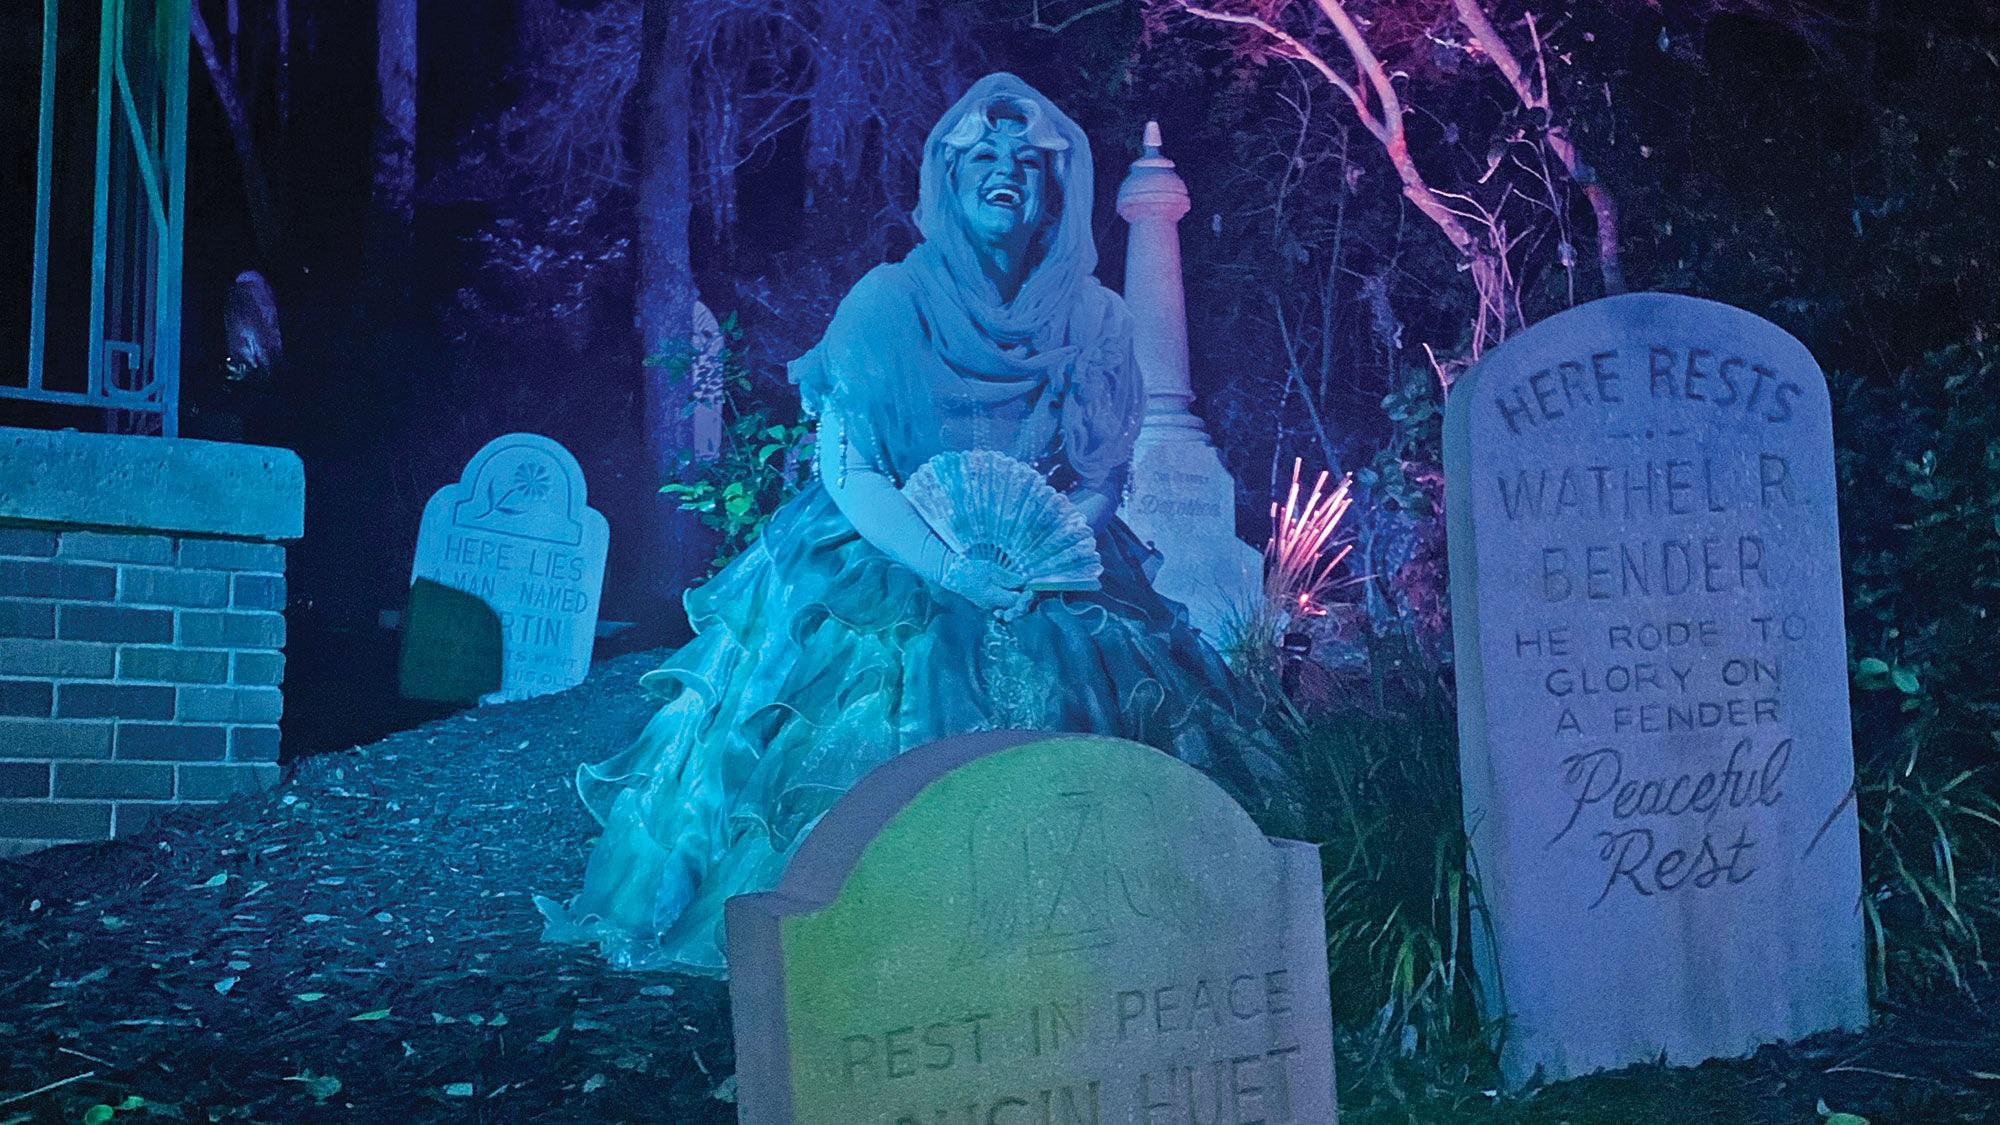 Renata, one of the ghostly residents of the Haunted Mansion, entertains guests from the graveyard.